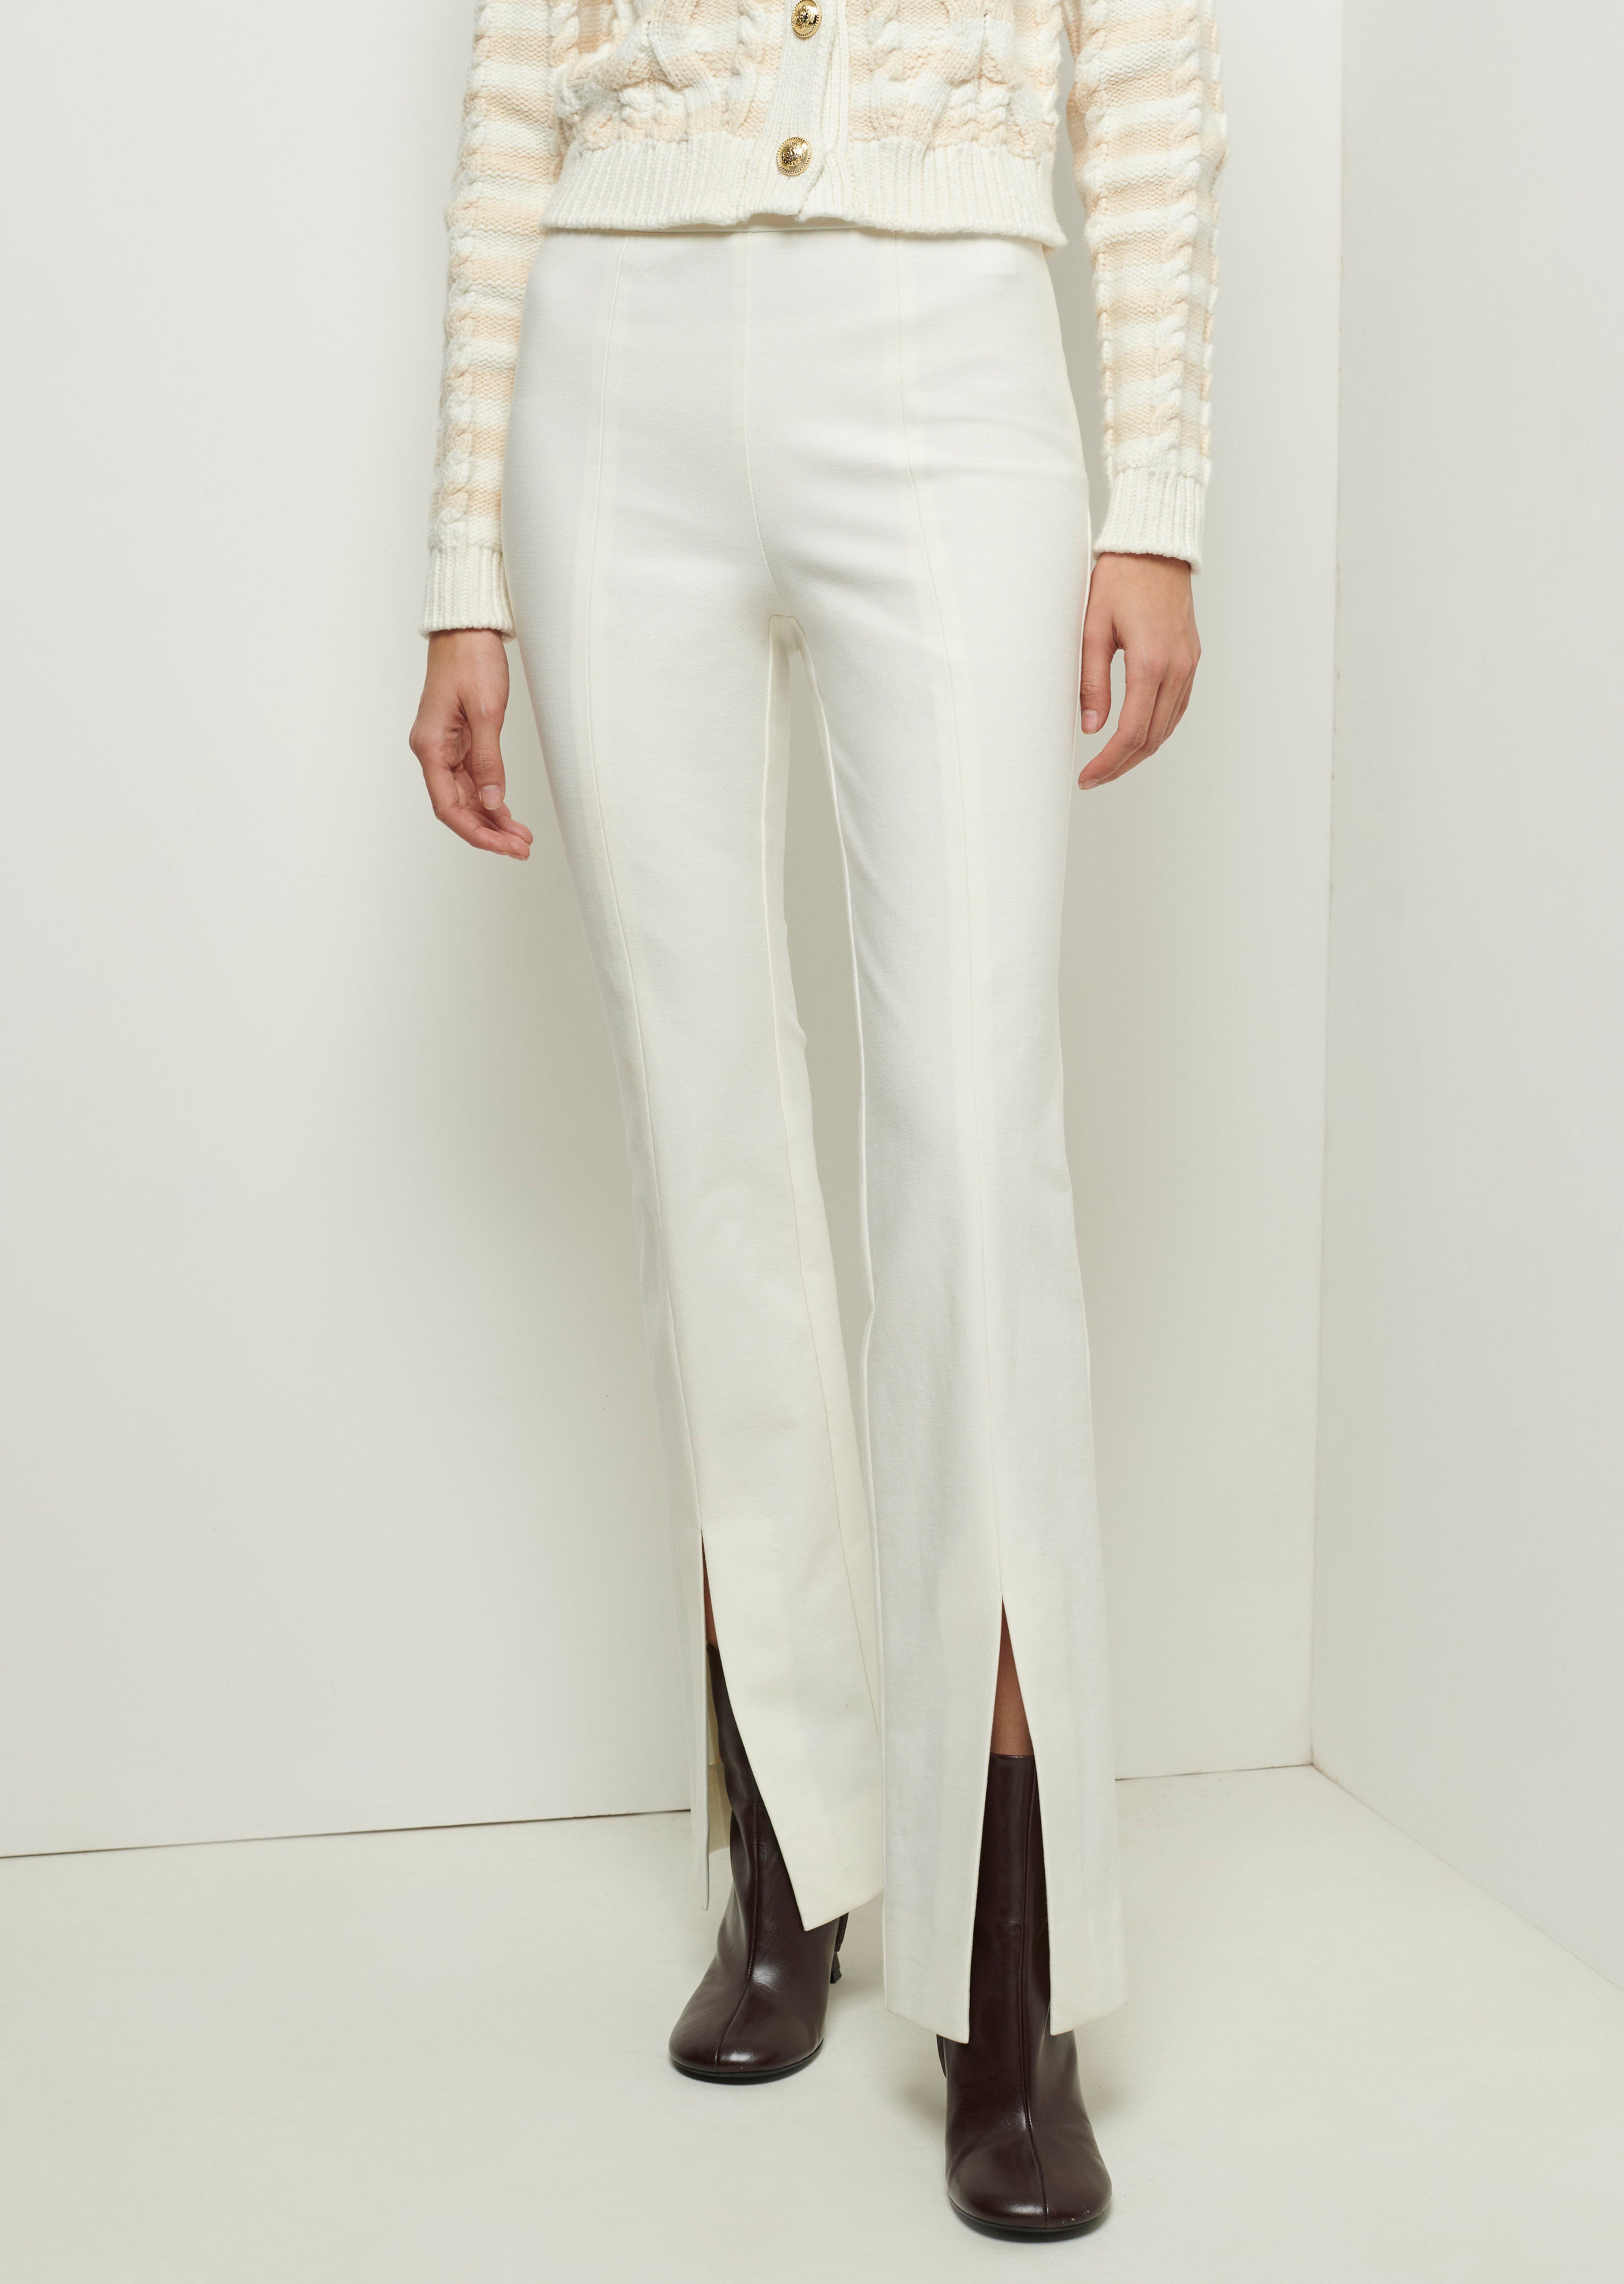 Lucia Front Slit Trousers - Soft White